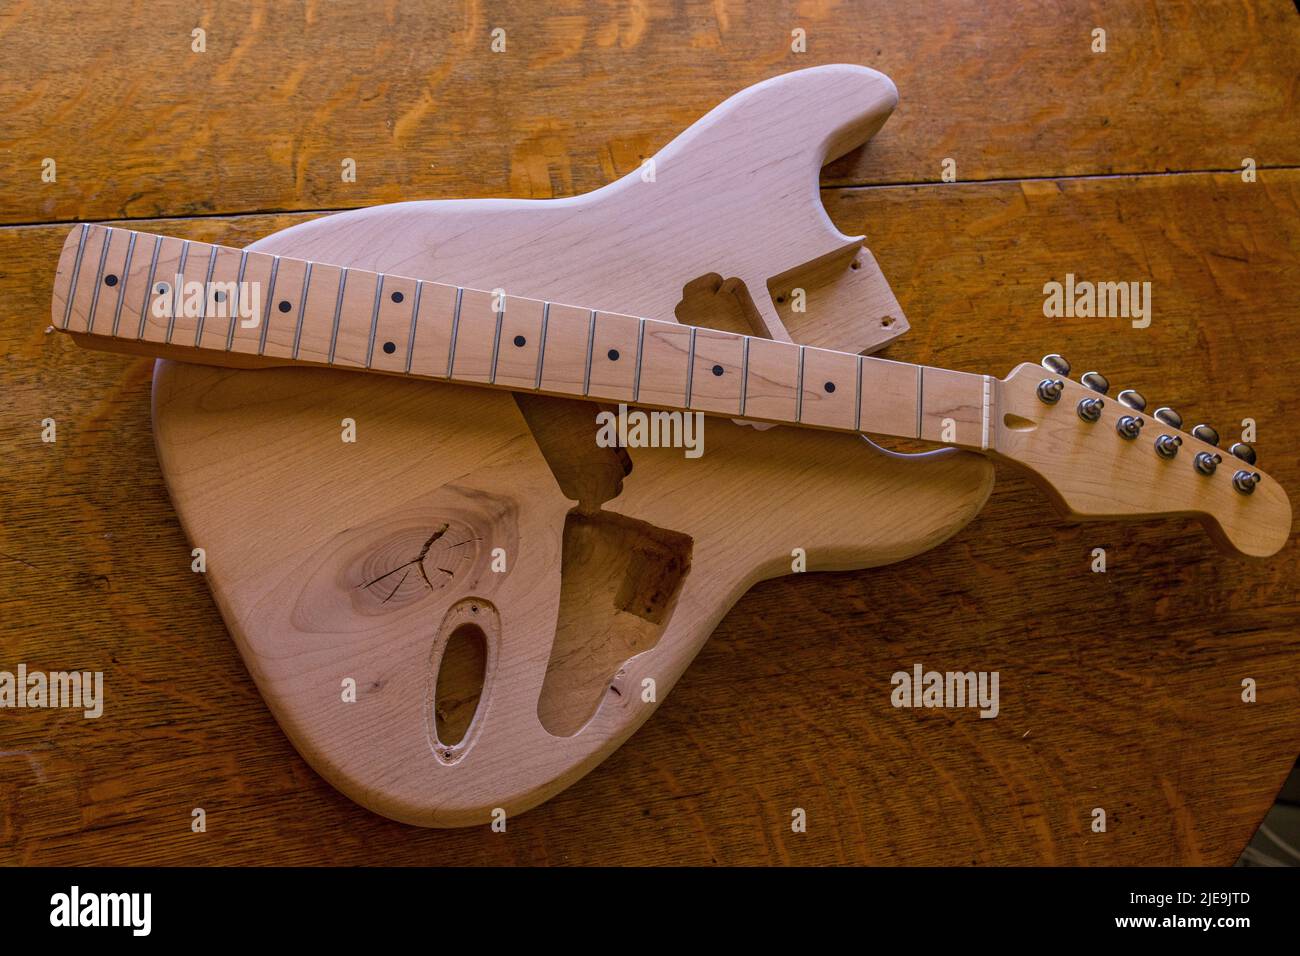 An electric stratocaster style guitar that is under construction Stock Photo